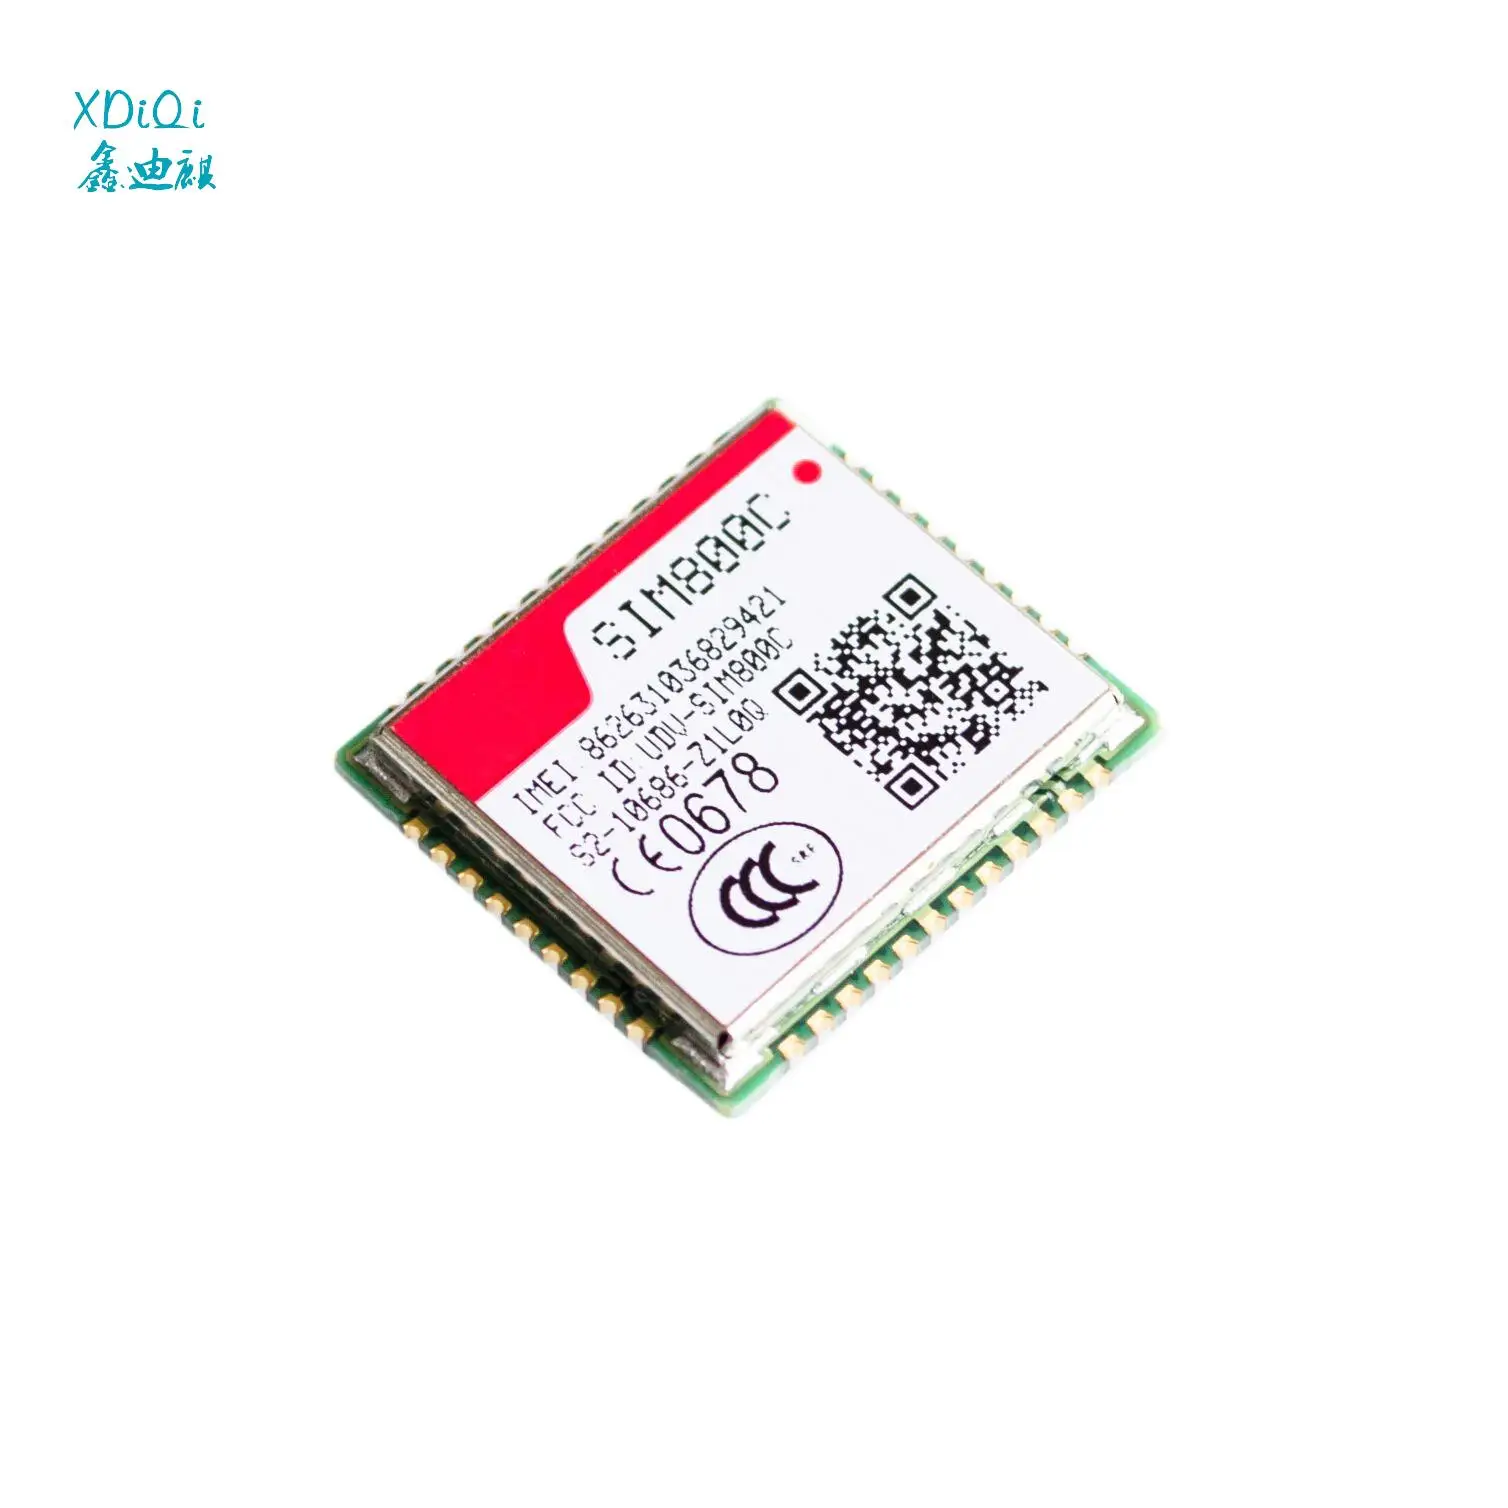 

SIM800C SIM800 Four frequency package Voice SMS data transfer module new original